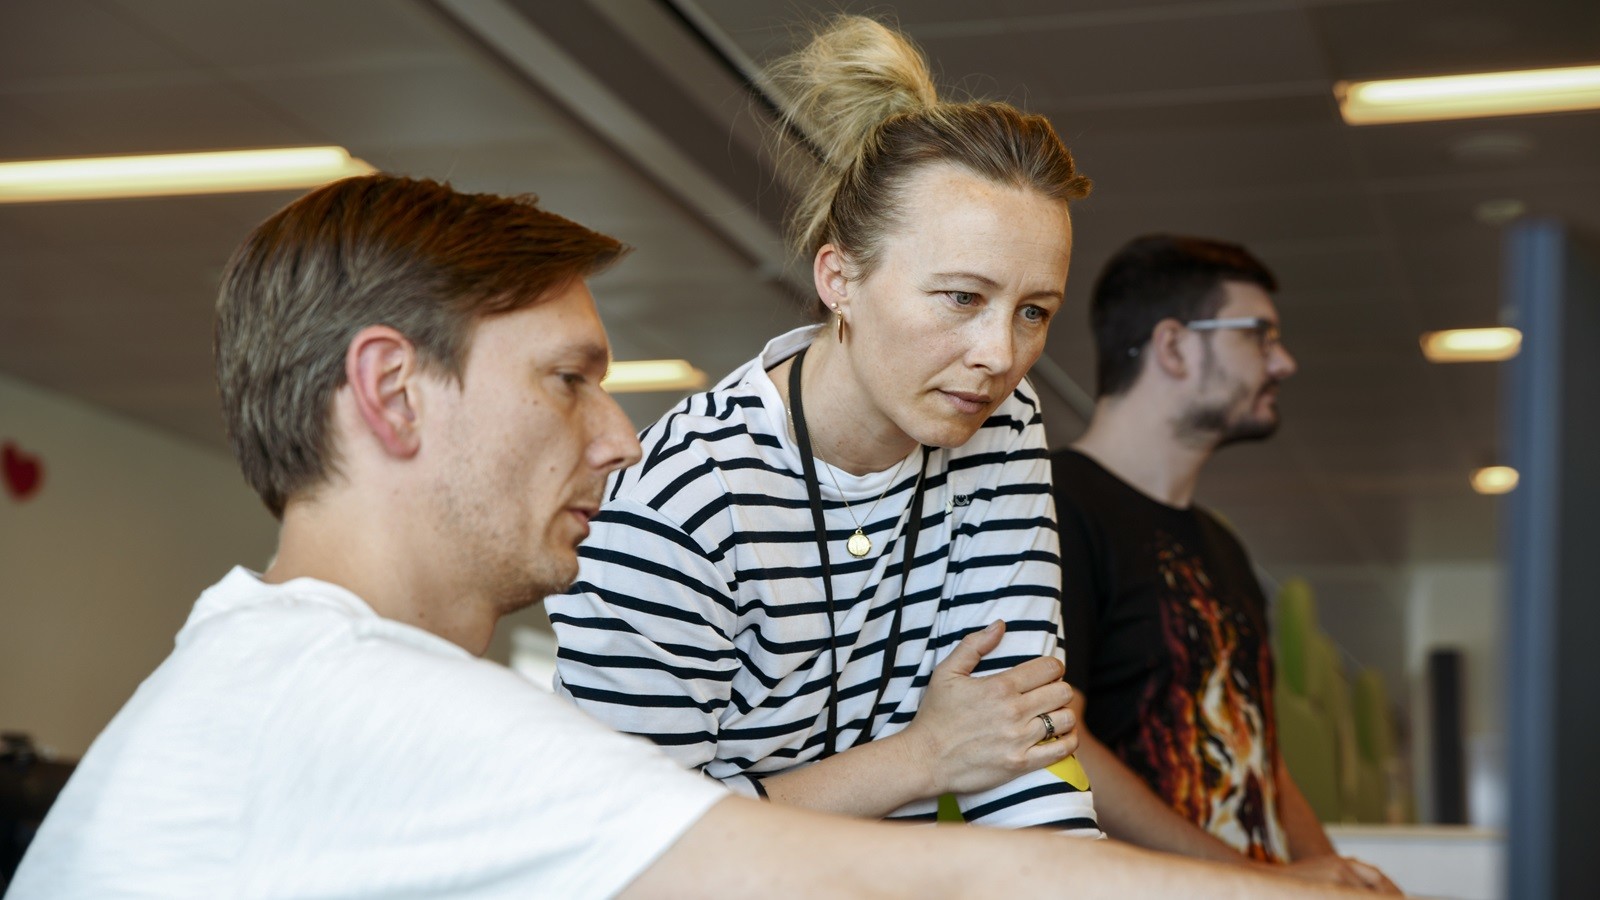 KMD Poland employees looking at a screen together at a desk